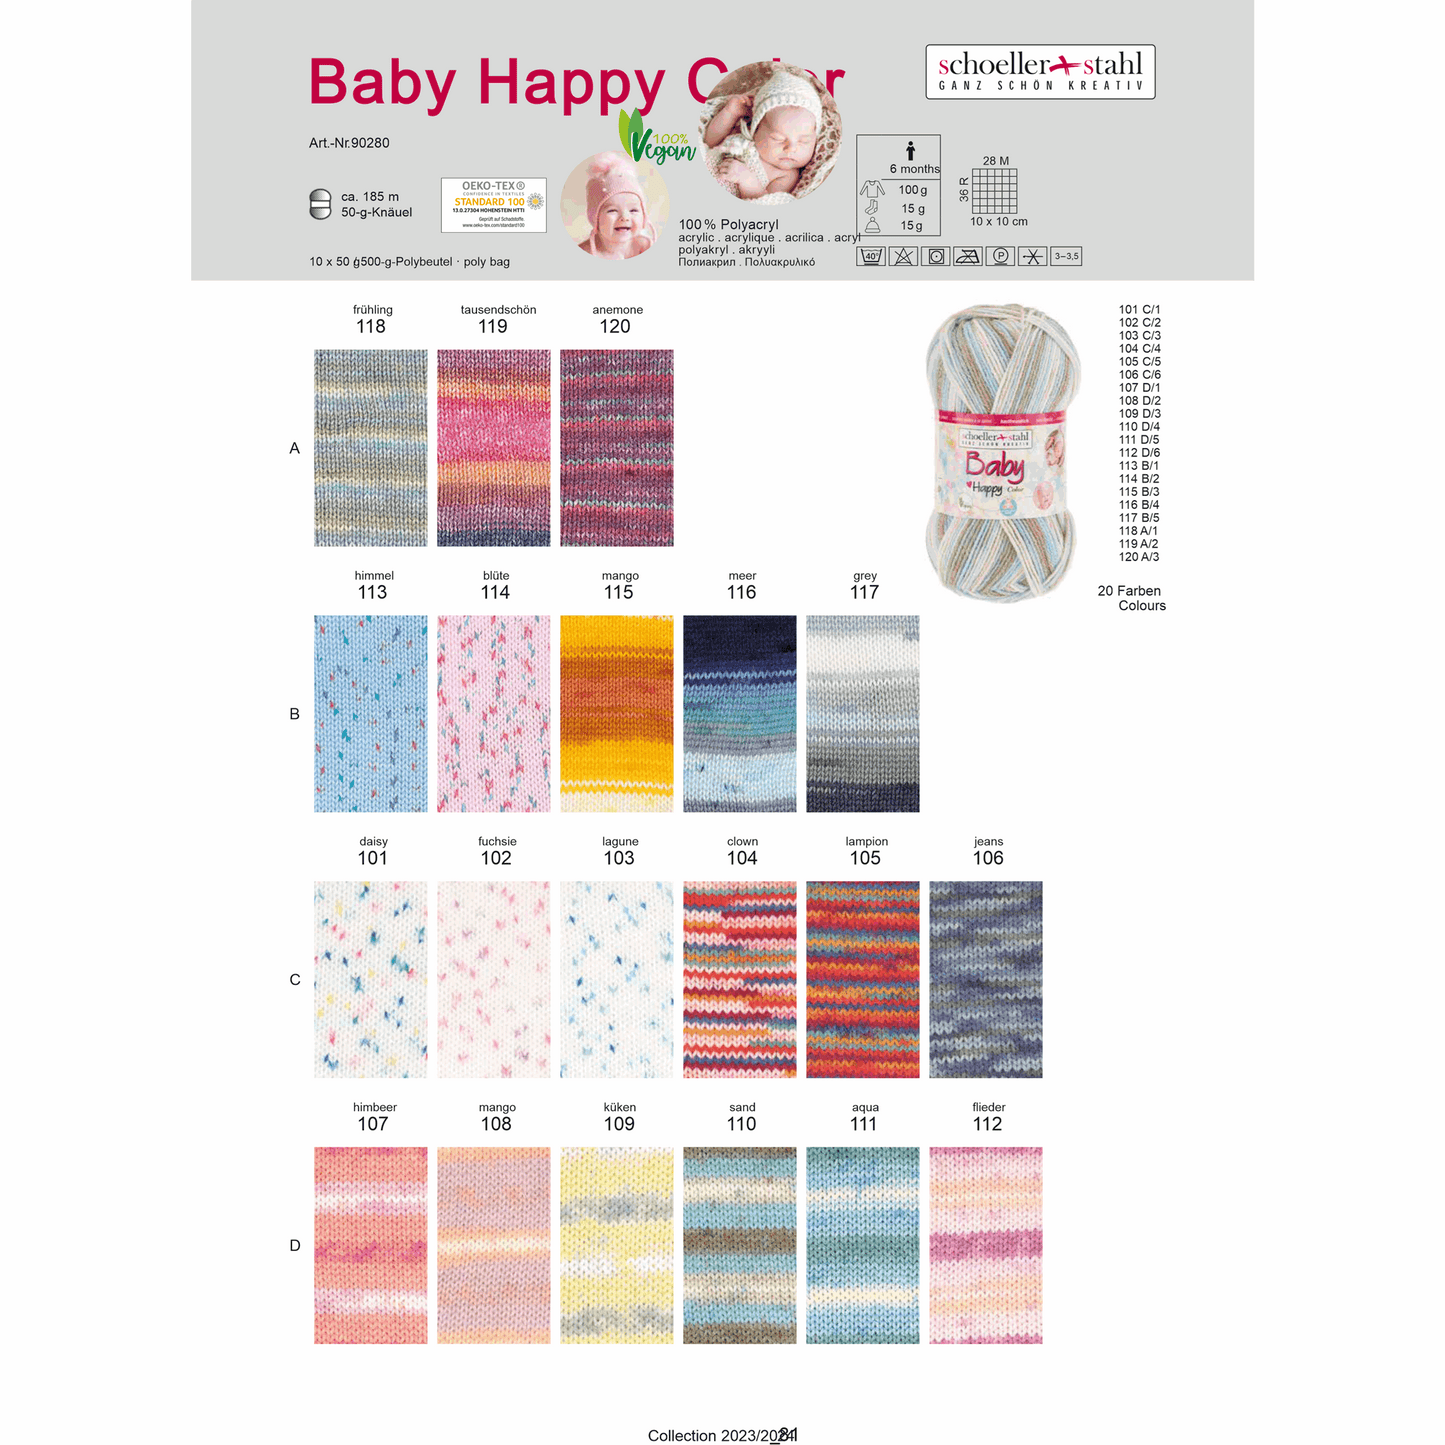 Baby happy color 50g, 90280, color 106, jeans